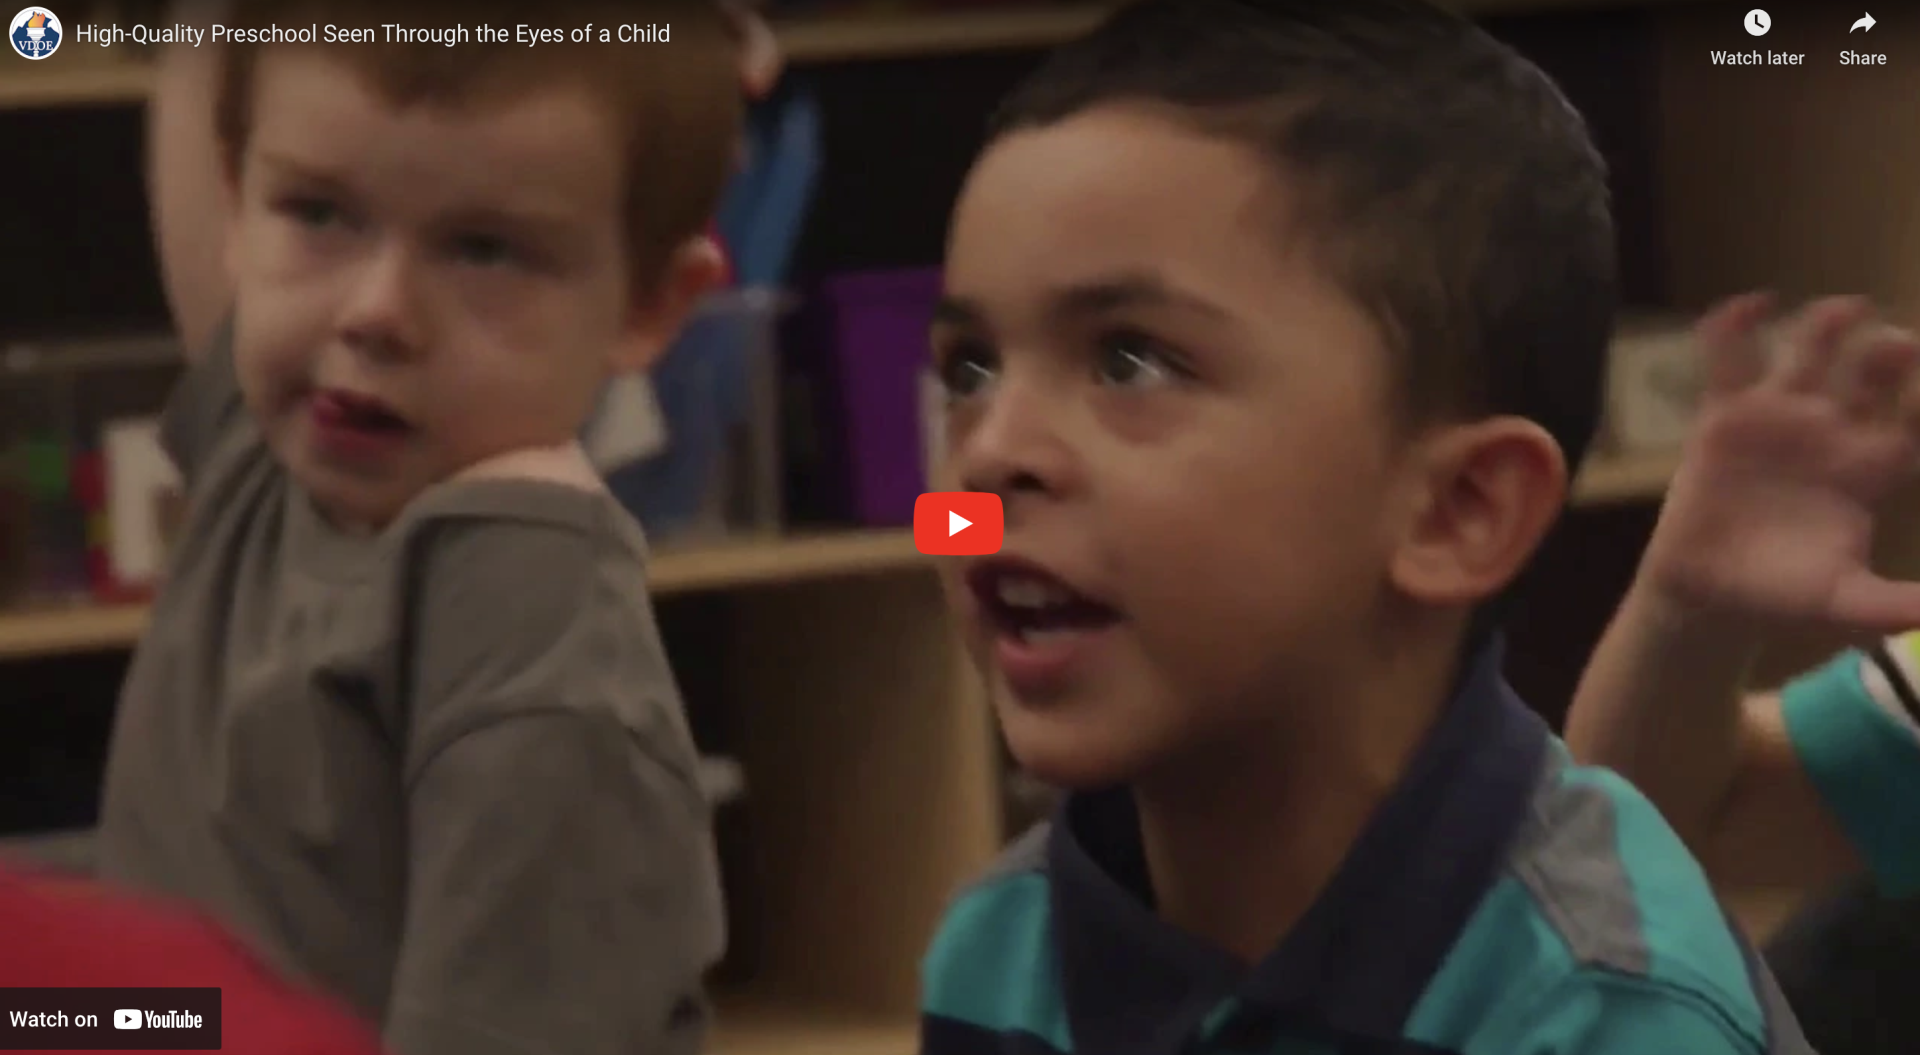 Click here to view video: High-Quality Preschool Seen Through the Eyes of a Child